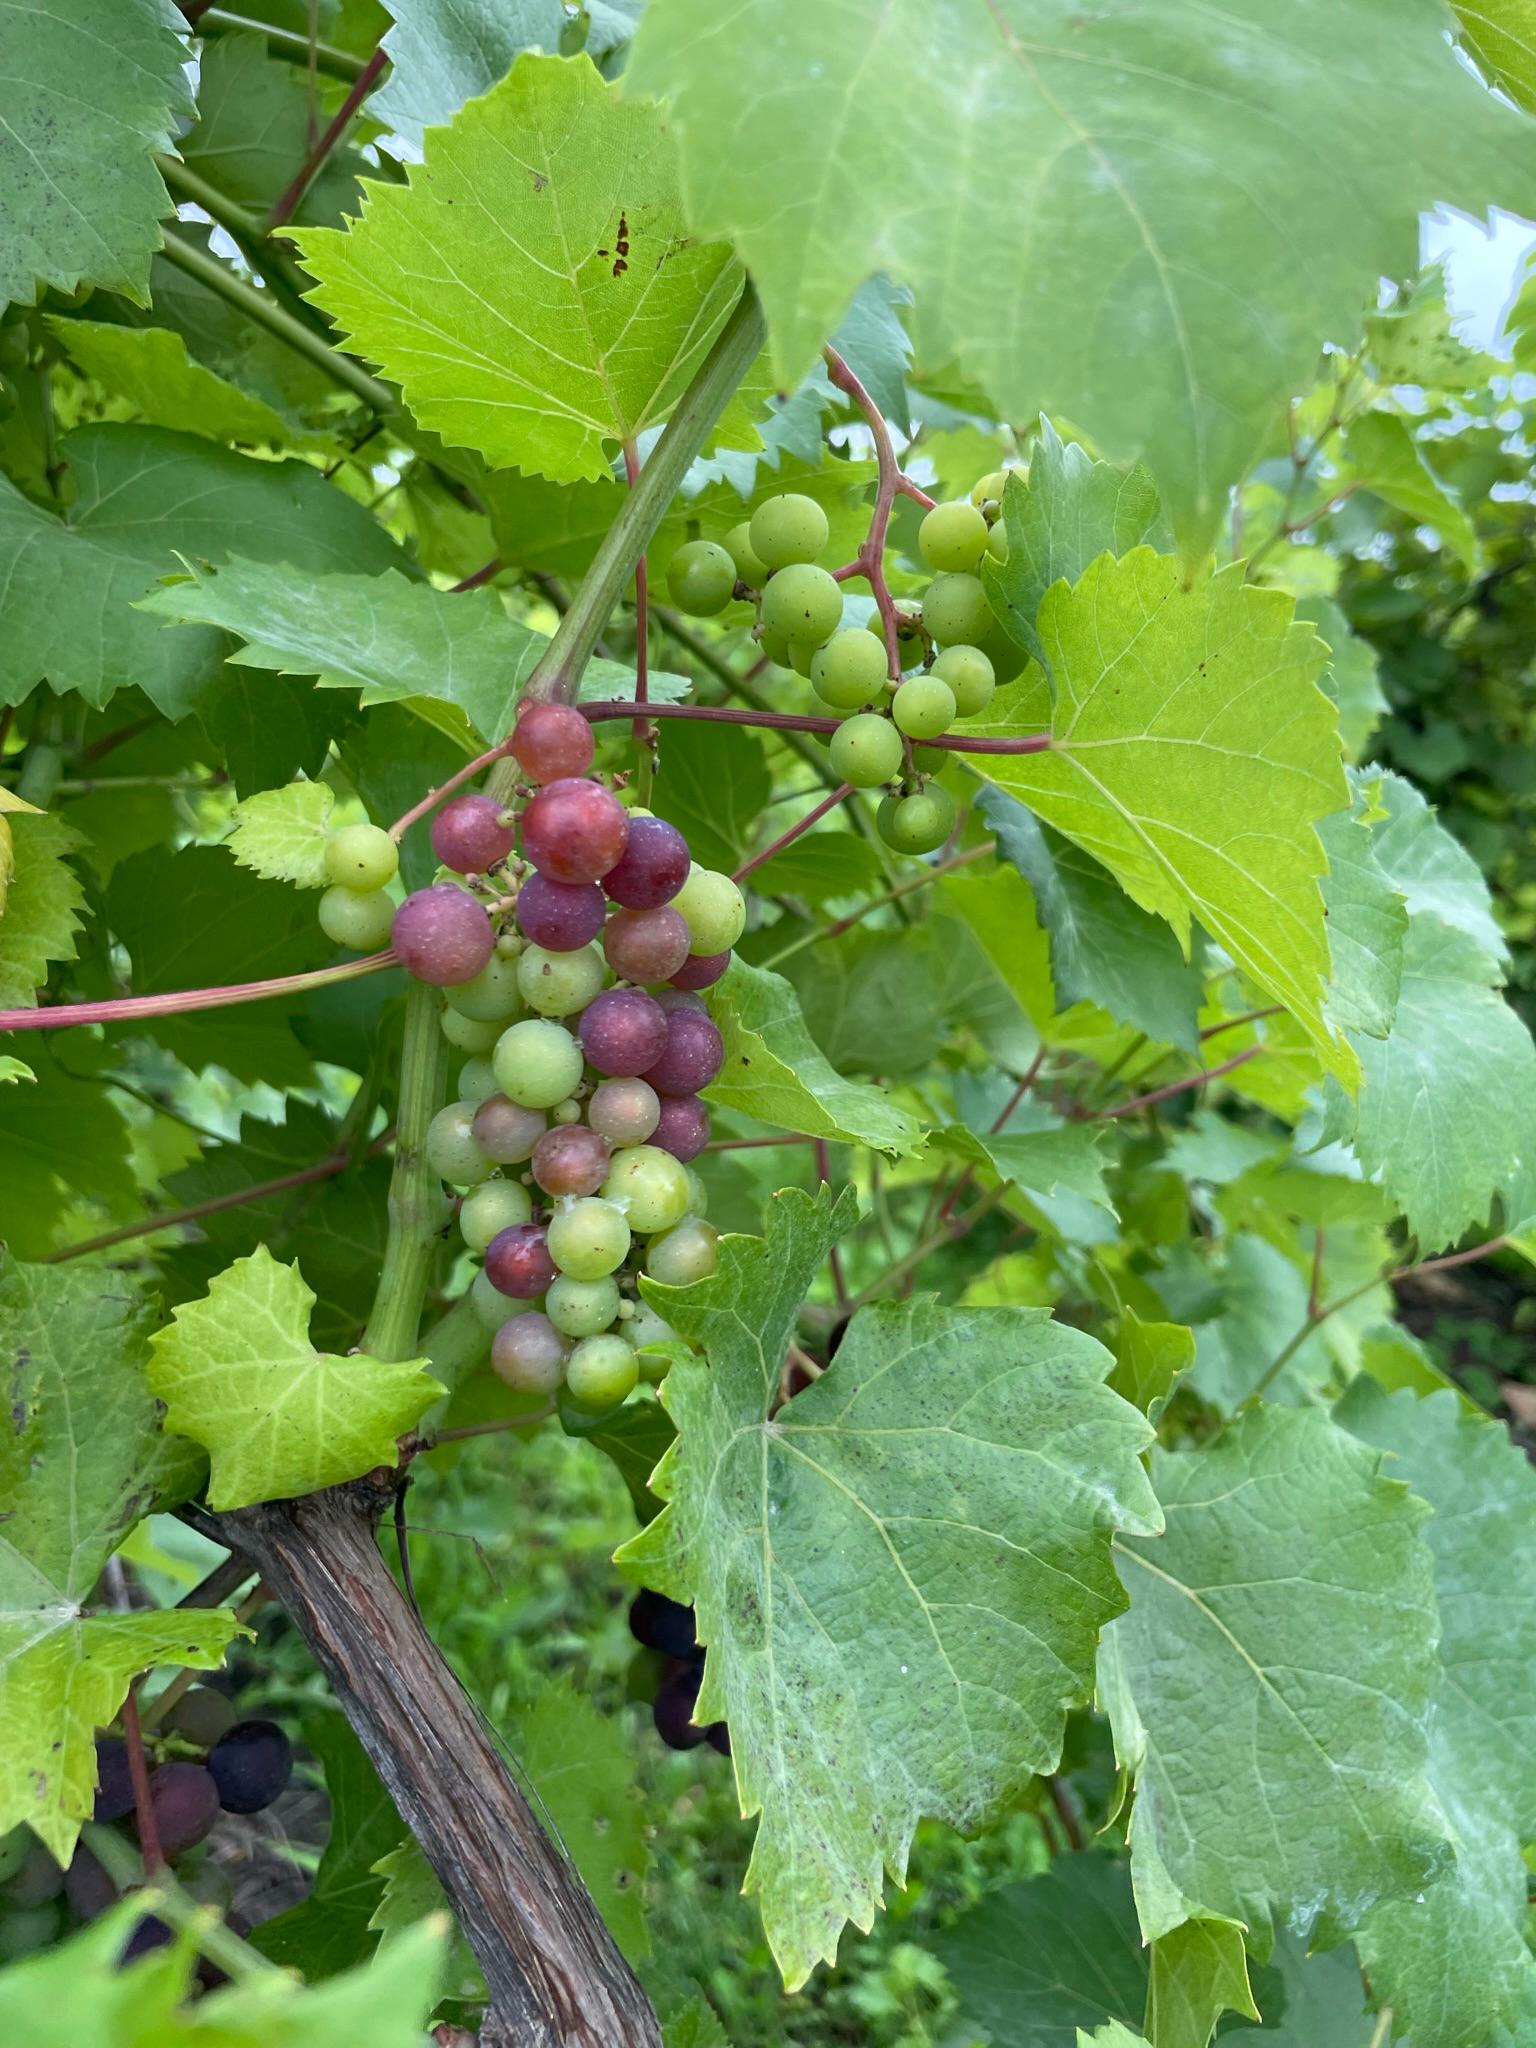 Grapes changing color from green to red.